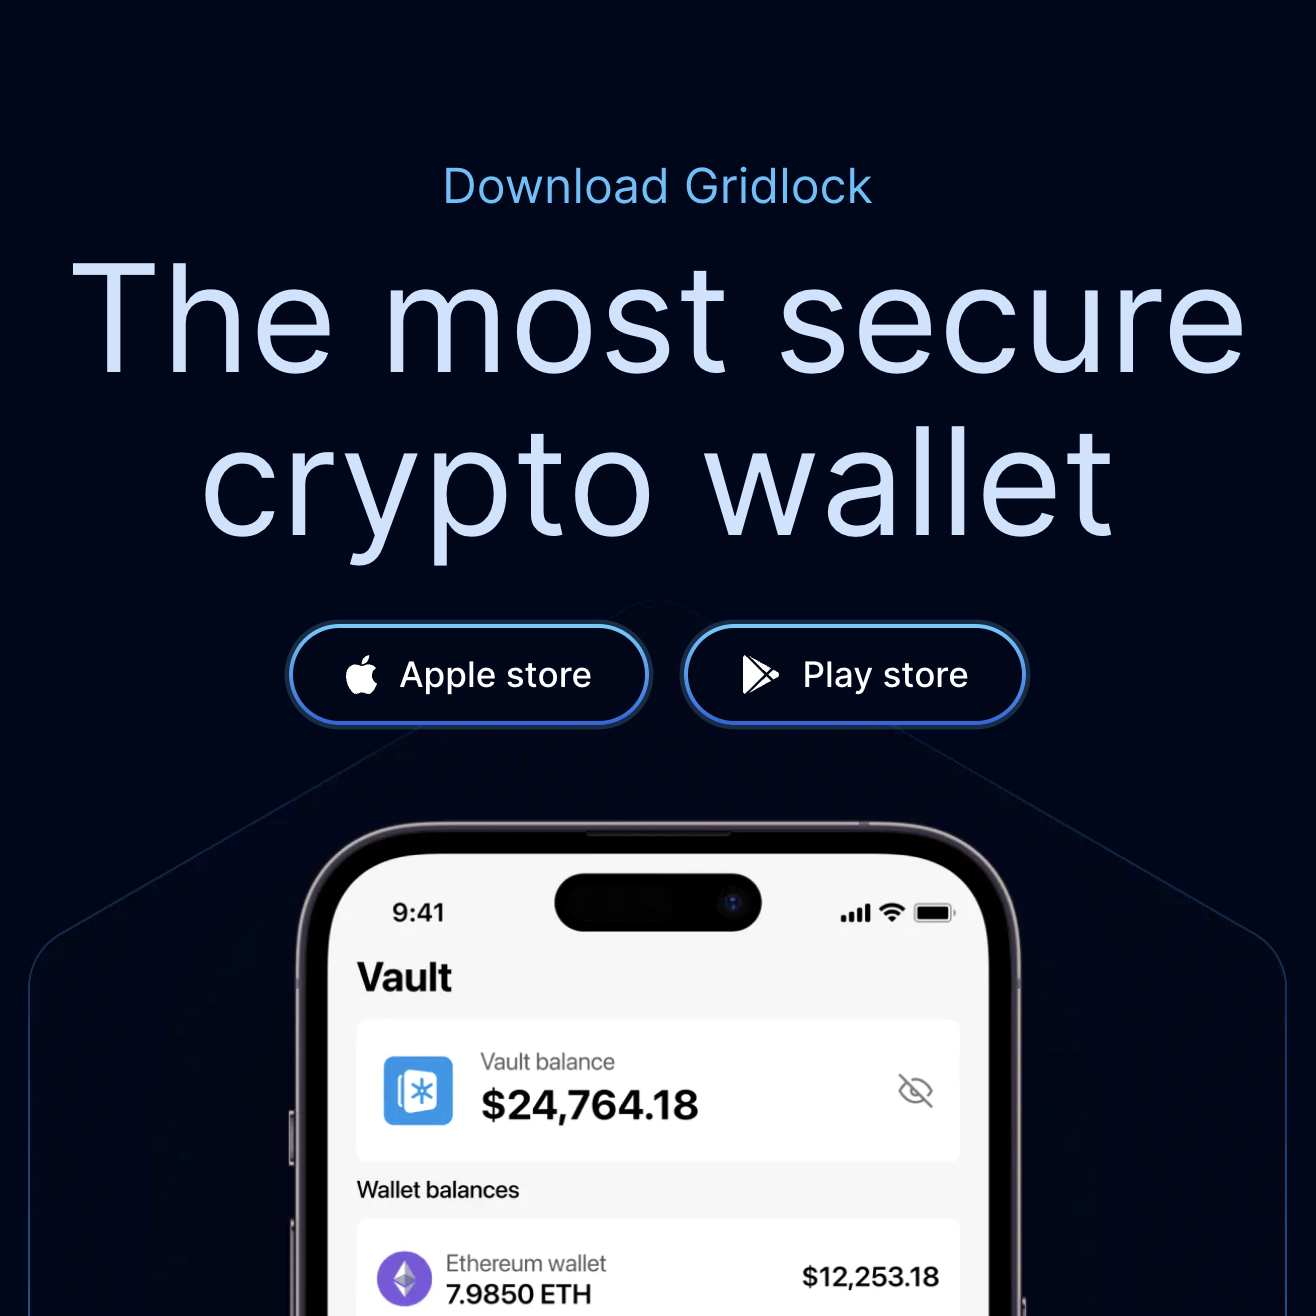 , Gridlock, Inc. Launches Revolutionary Crypto and NFT Wallet with Best In Class Security for Traditional Finance and Crypto Investors Alike